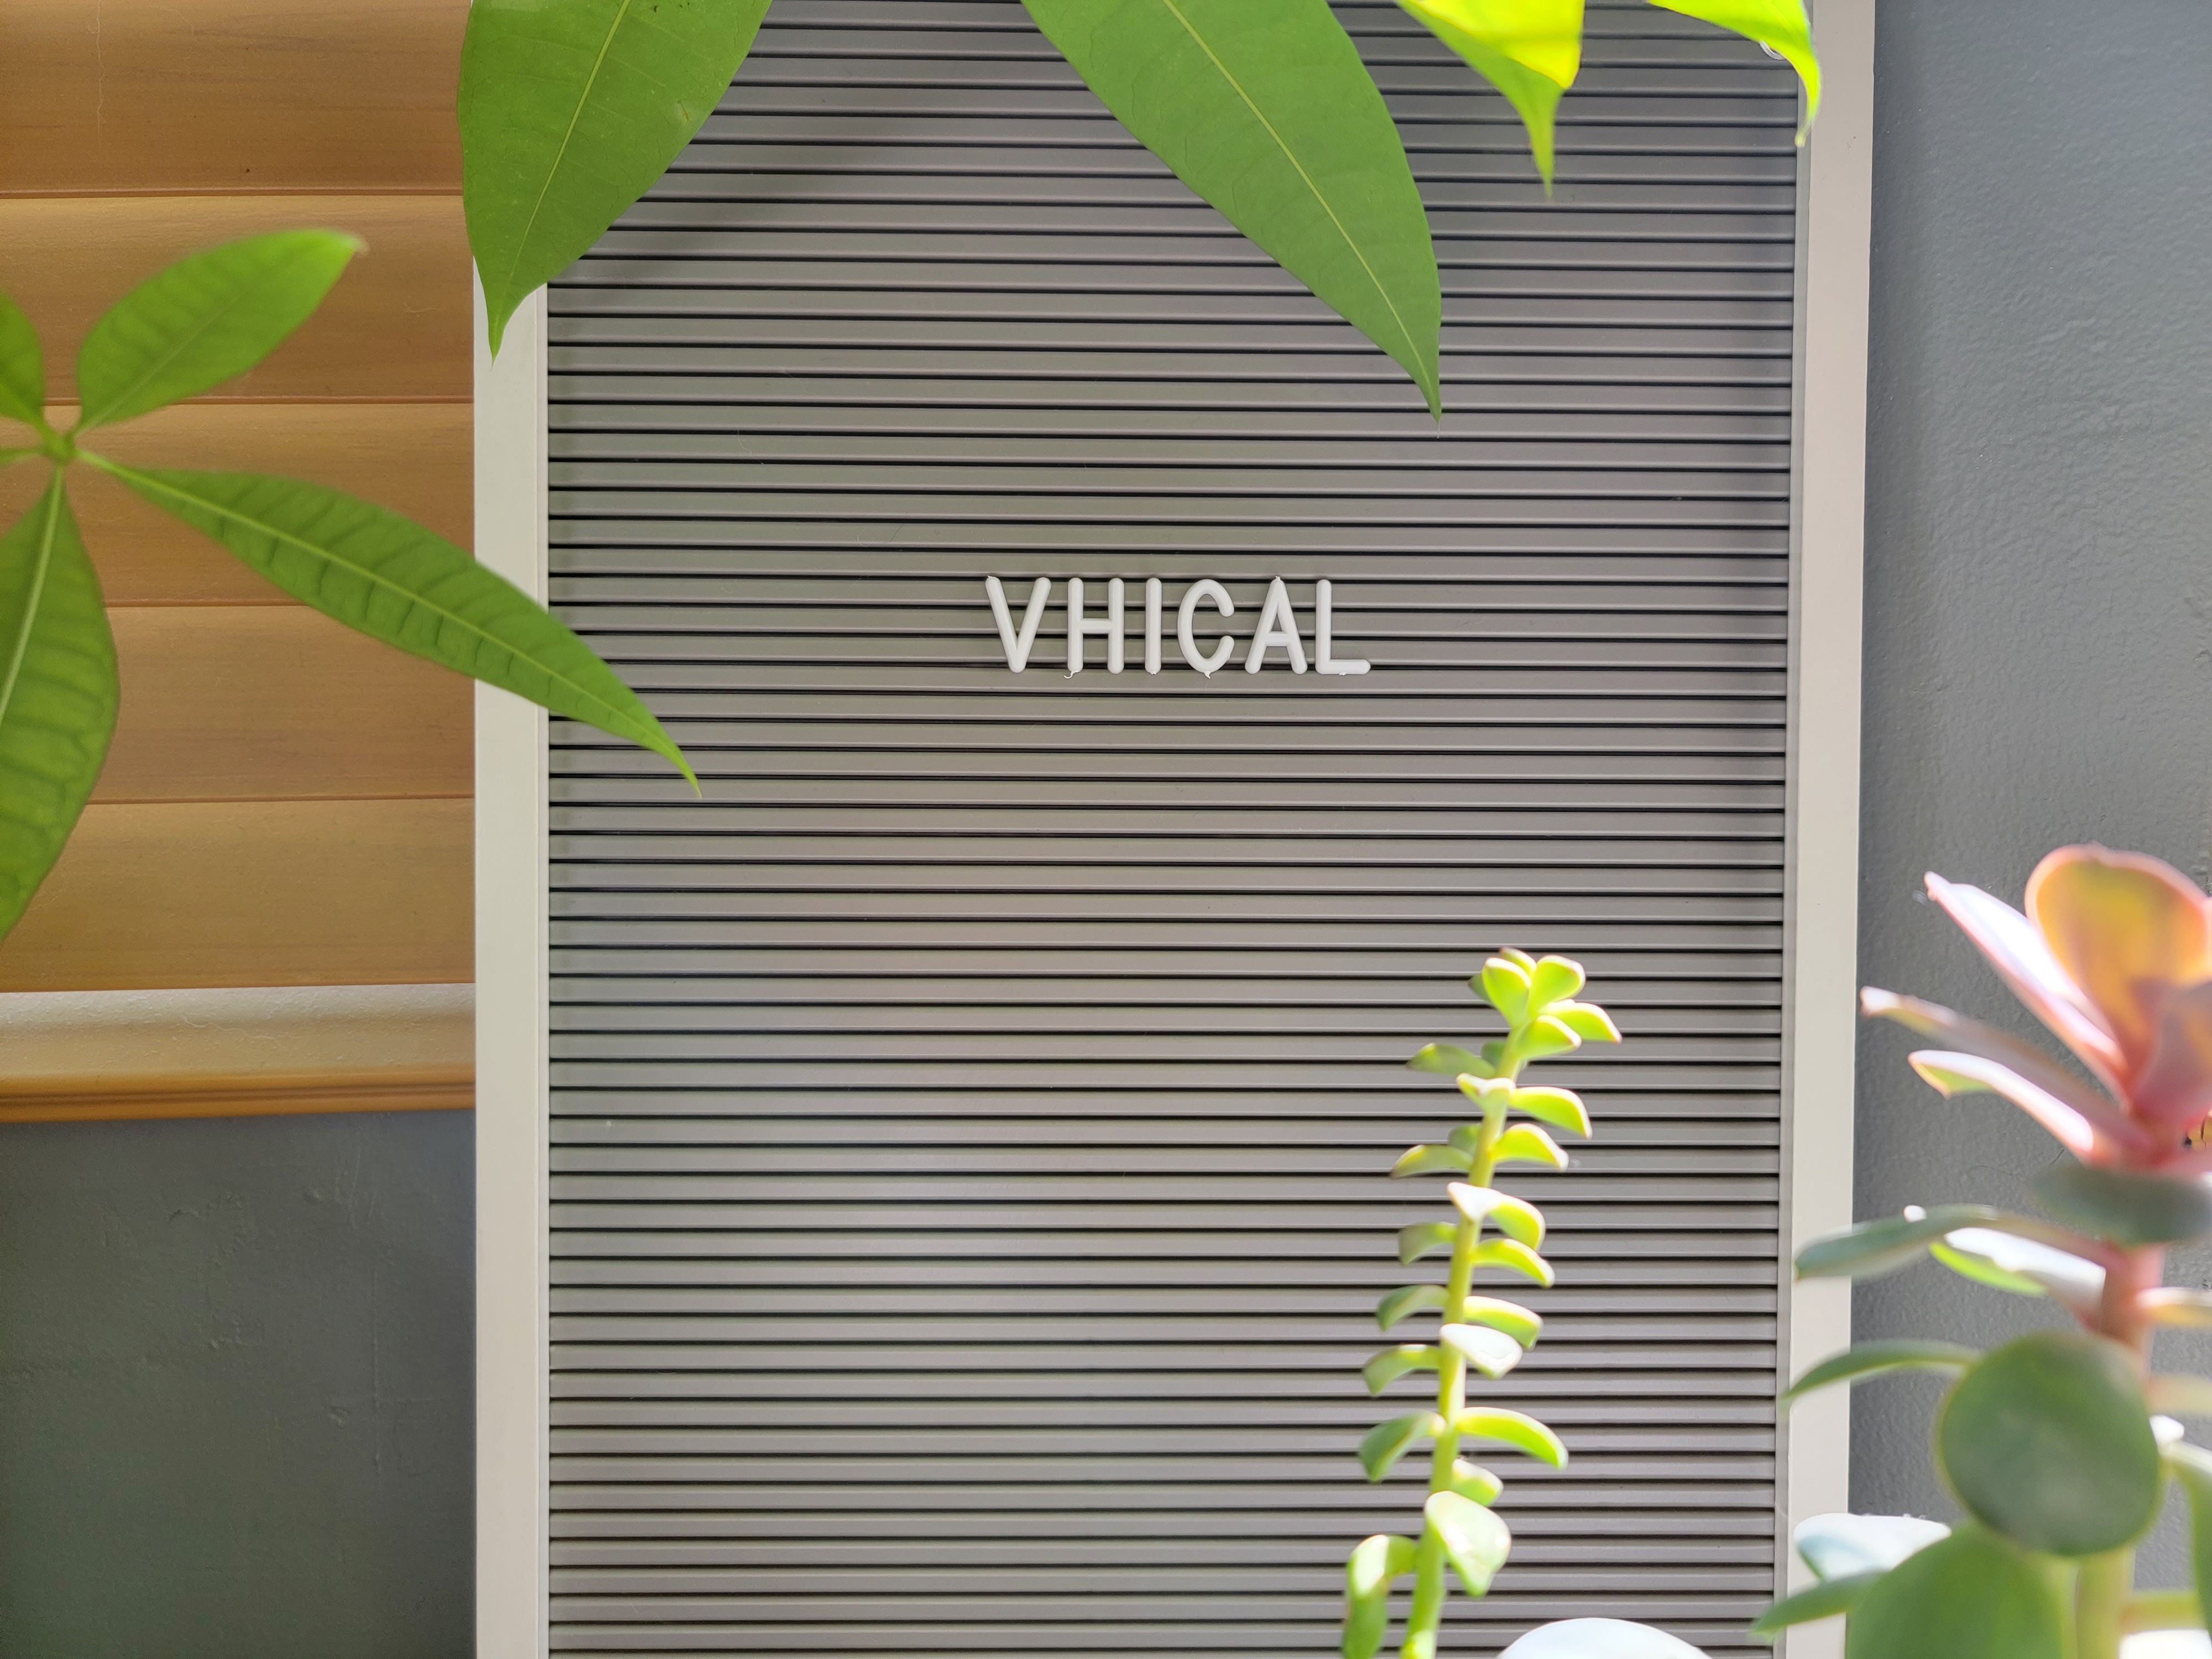 "Vhical" on a letter board among plants